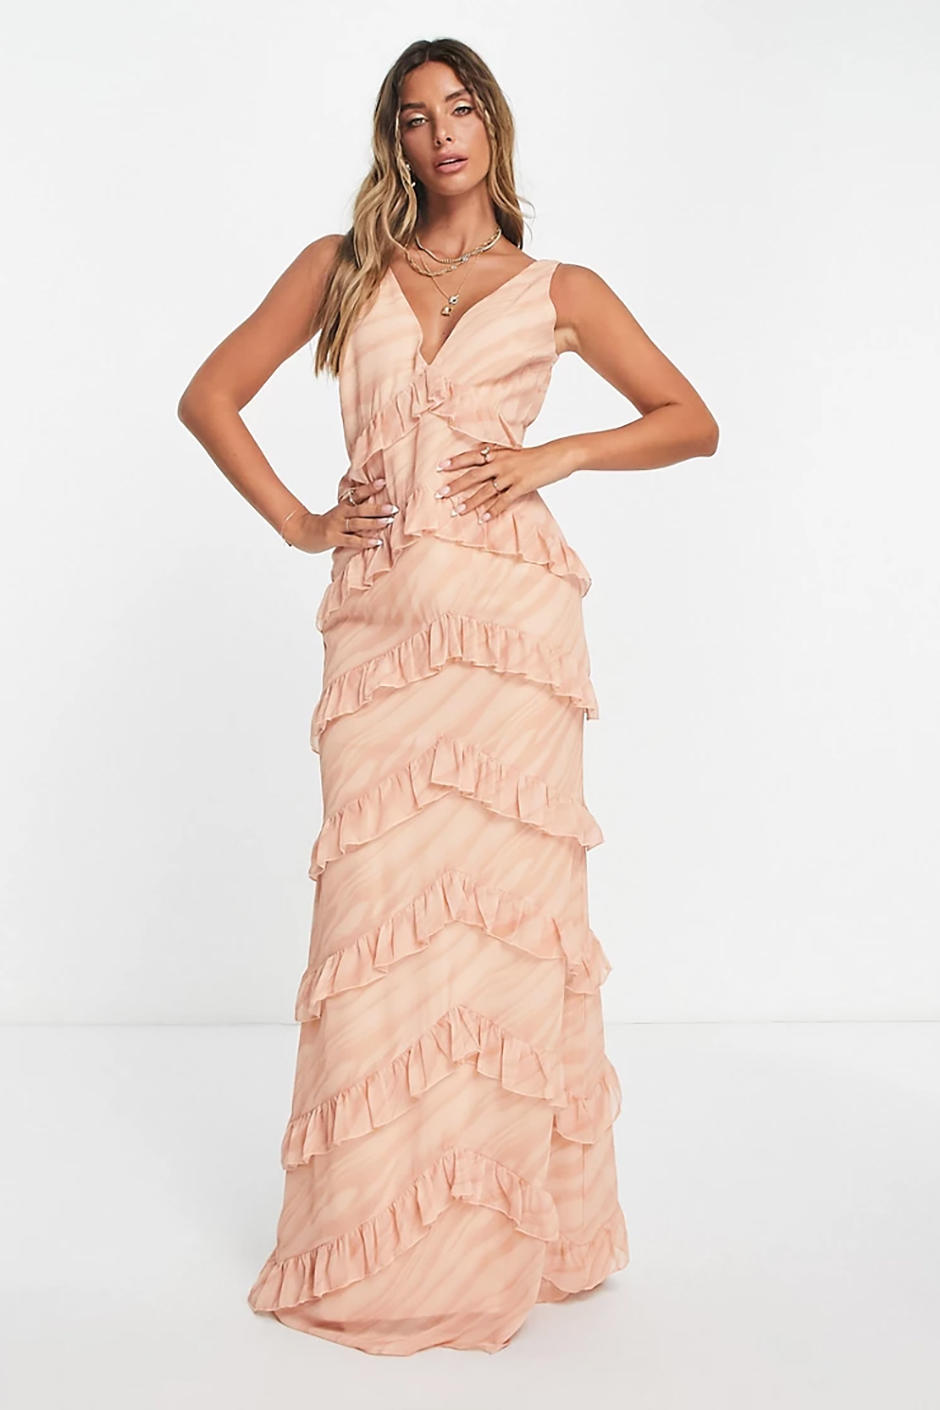 Peach bridesmaid dress with layered ruffle tiers from ASOS